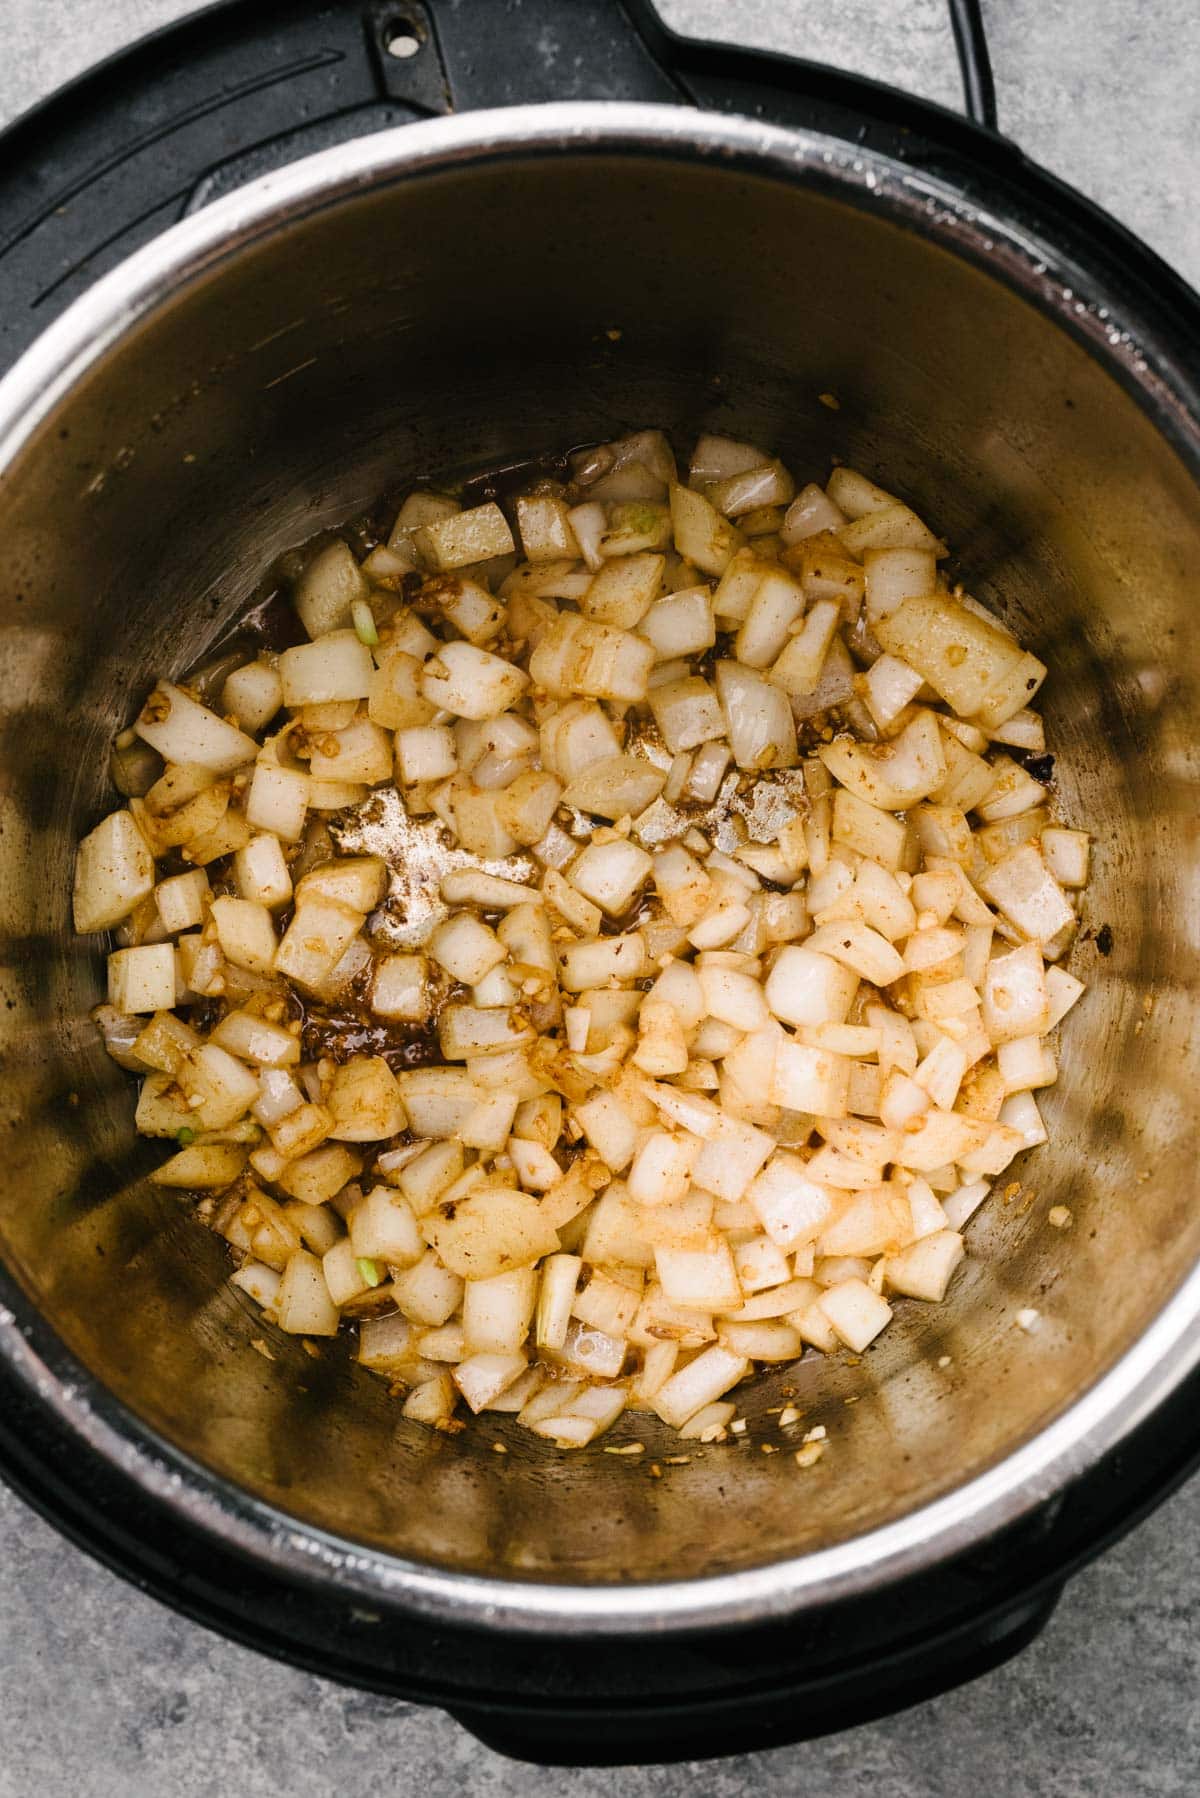 Sautéed onions and garlic in an Instant Pot.